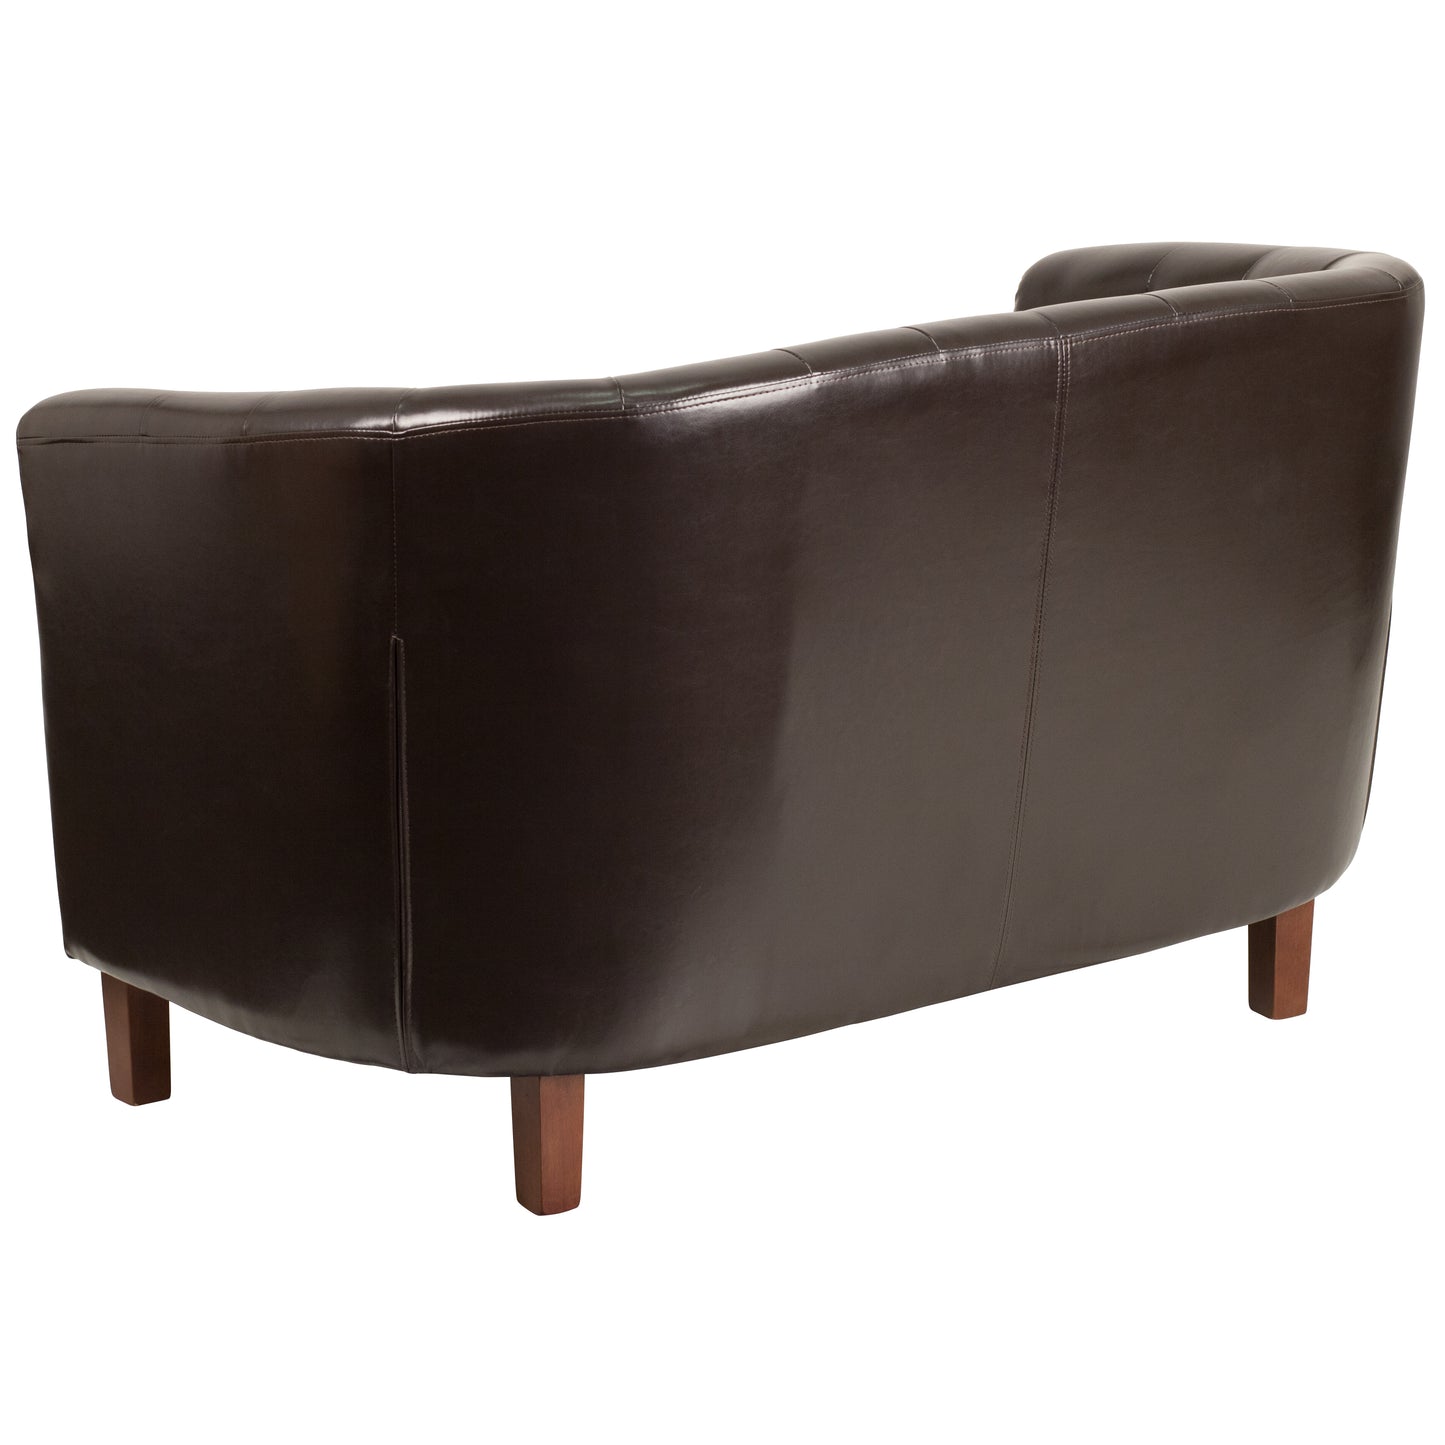 Brown Leather Barrel Loveseat QY-B16-2-HY-9030-8-BN-GG